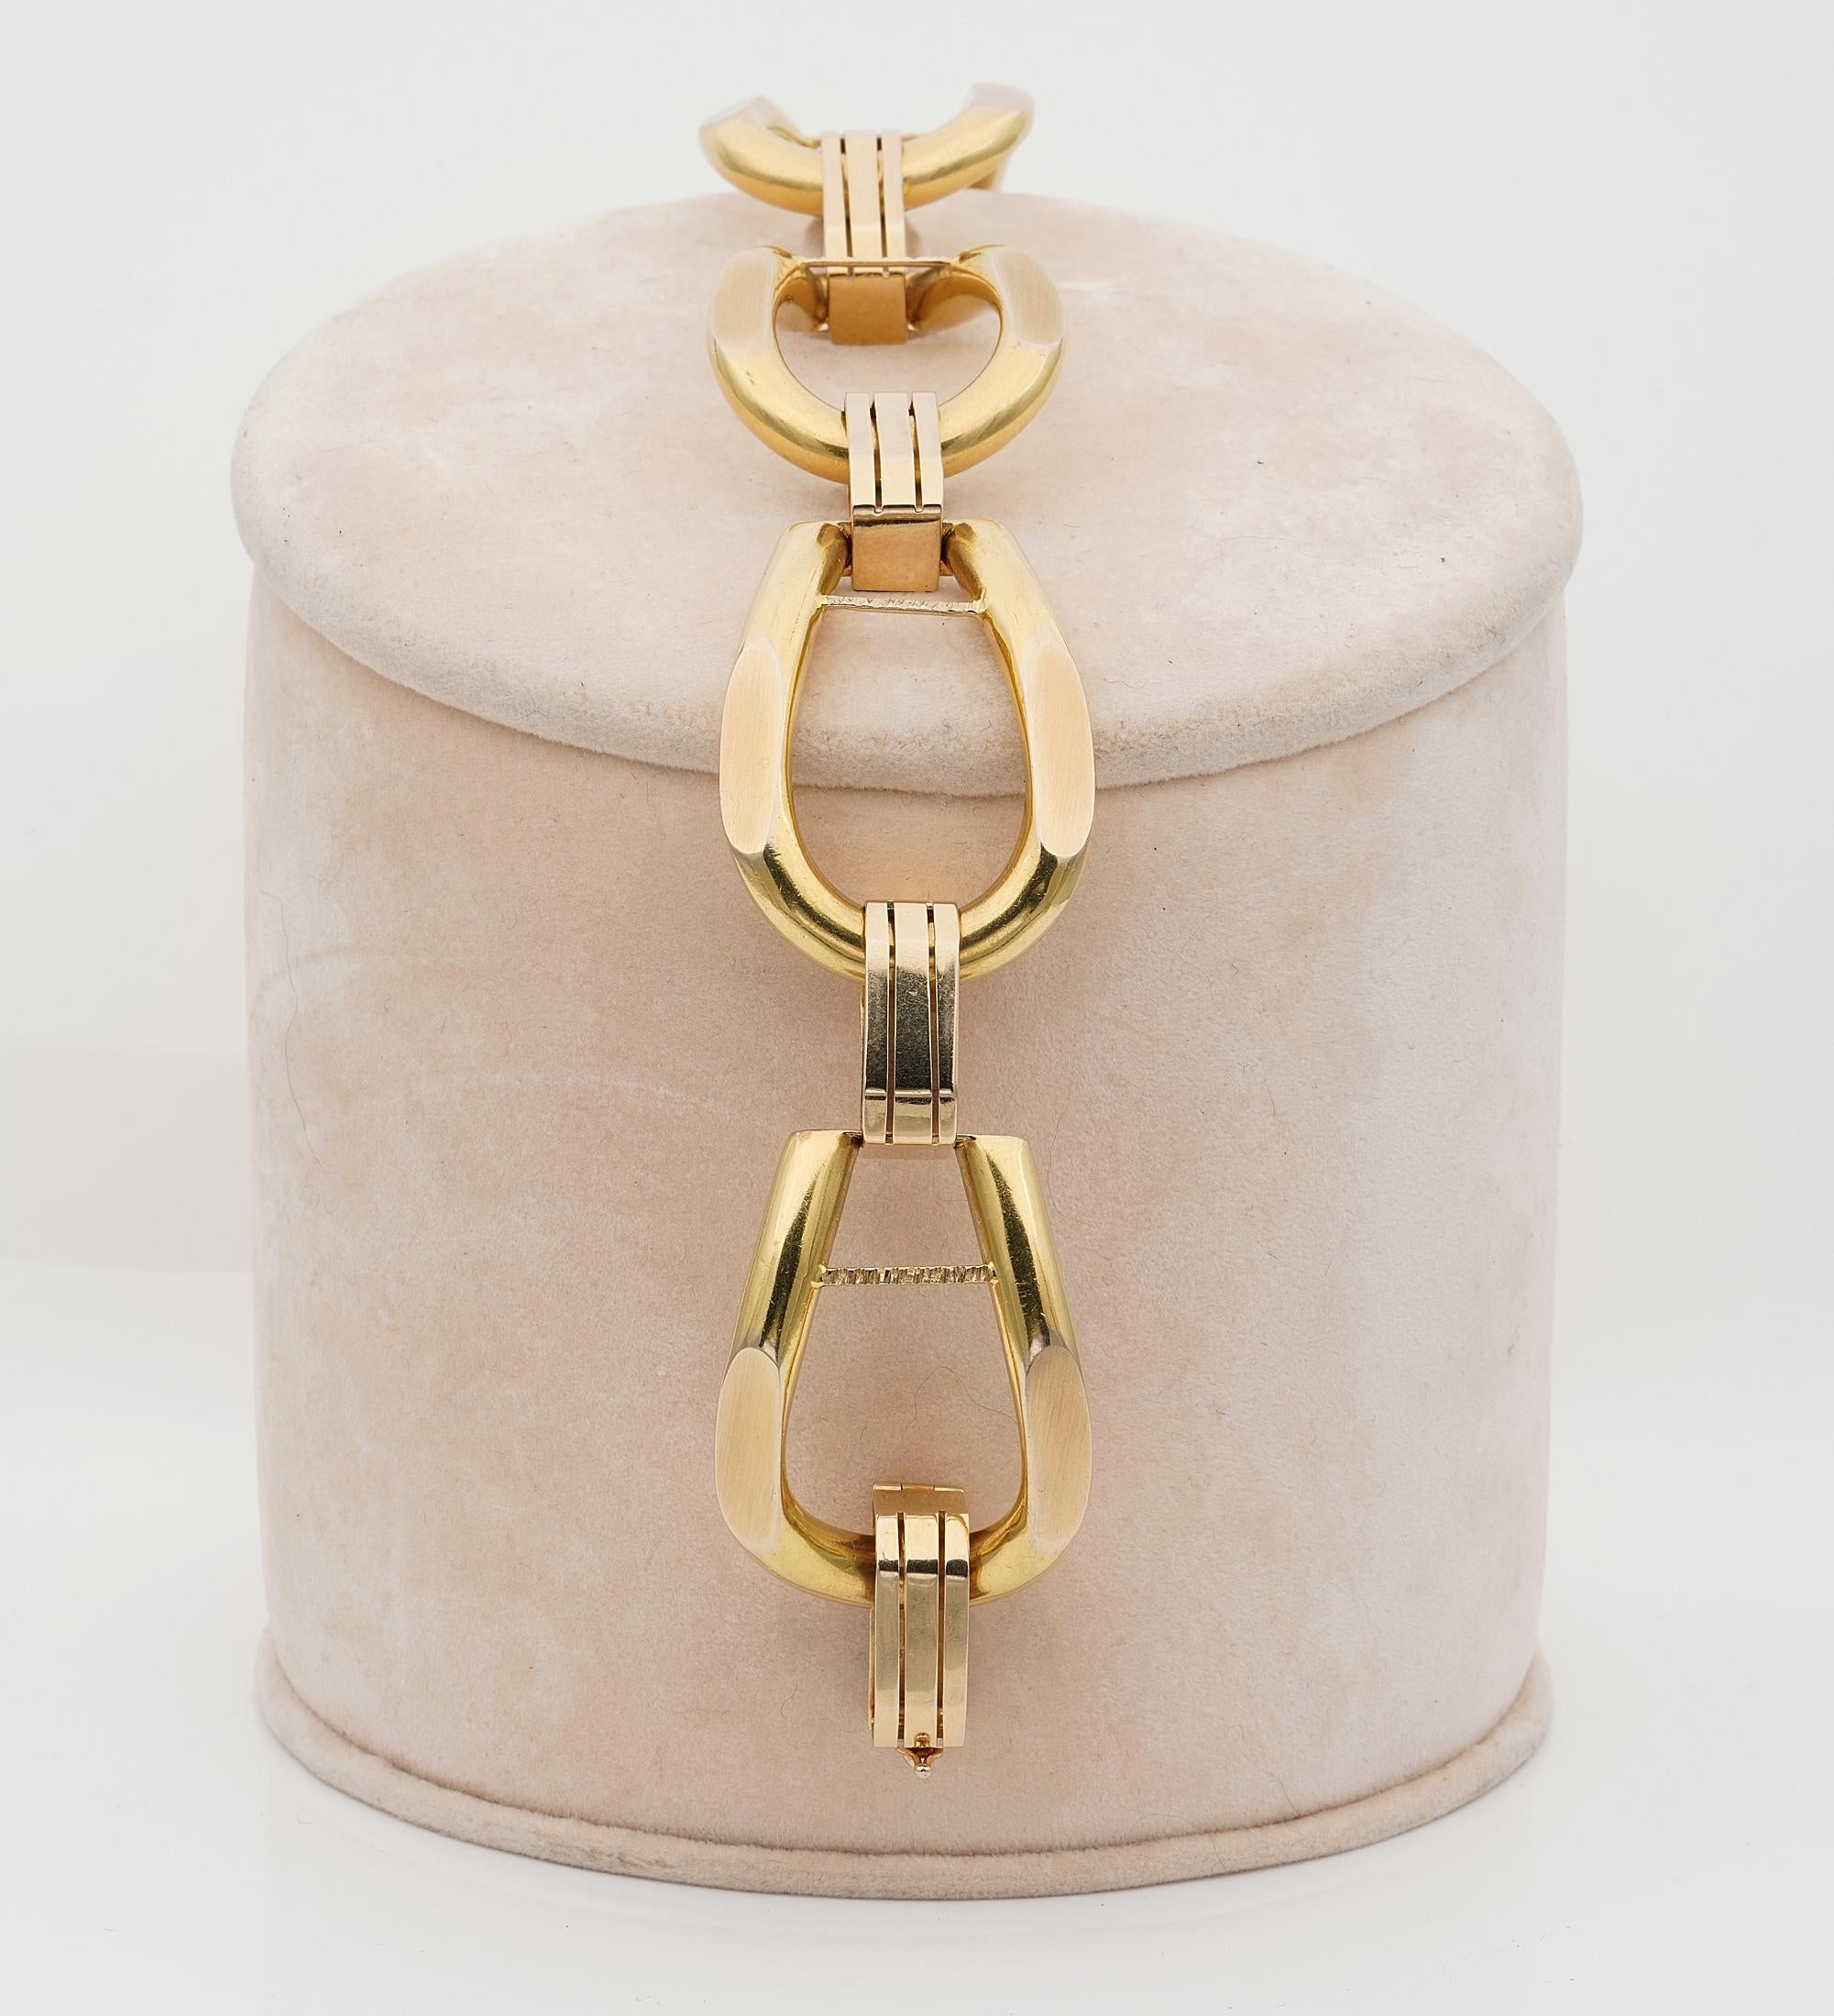 70’s Grand Chic
Beautiful large Horse Stirrup inspired links out from 70’s linked each other by geometric connecting links giving even more character and style to the design – much Gucci style for this Grand Chic bracelet of understated